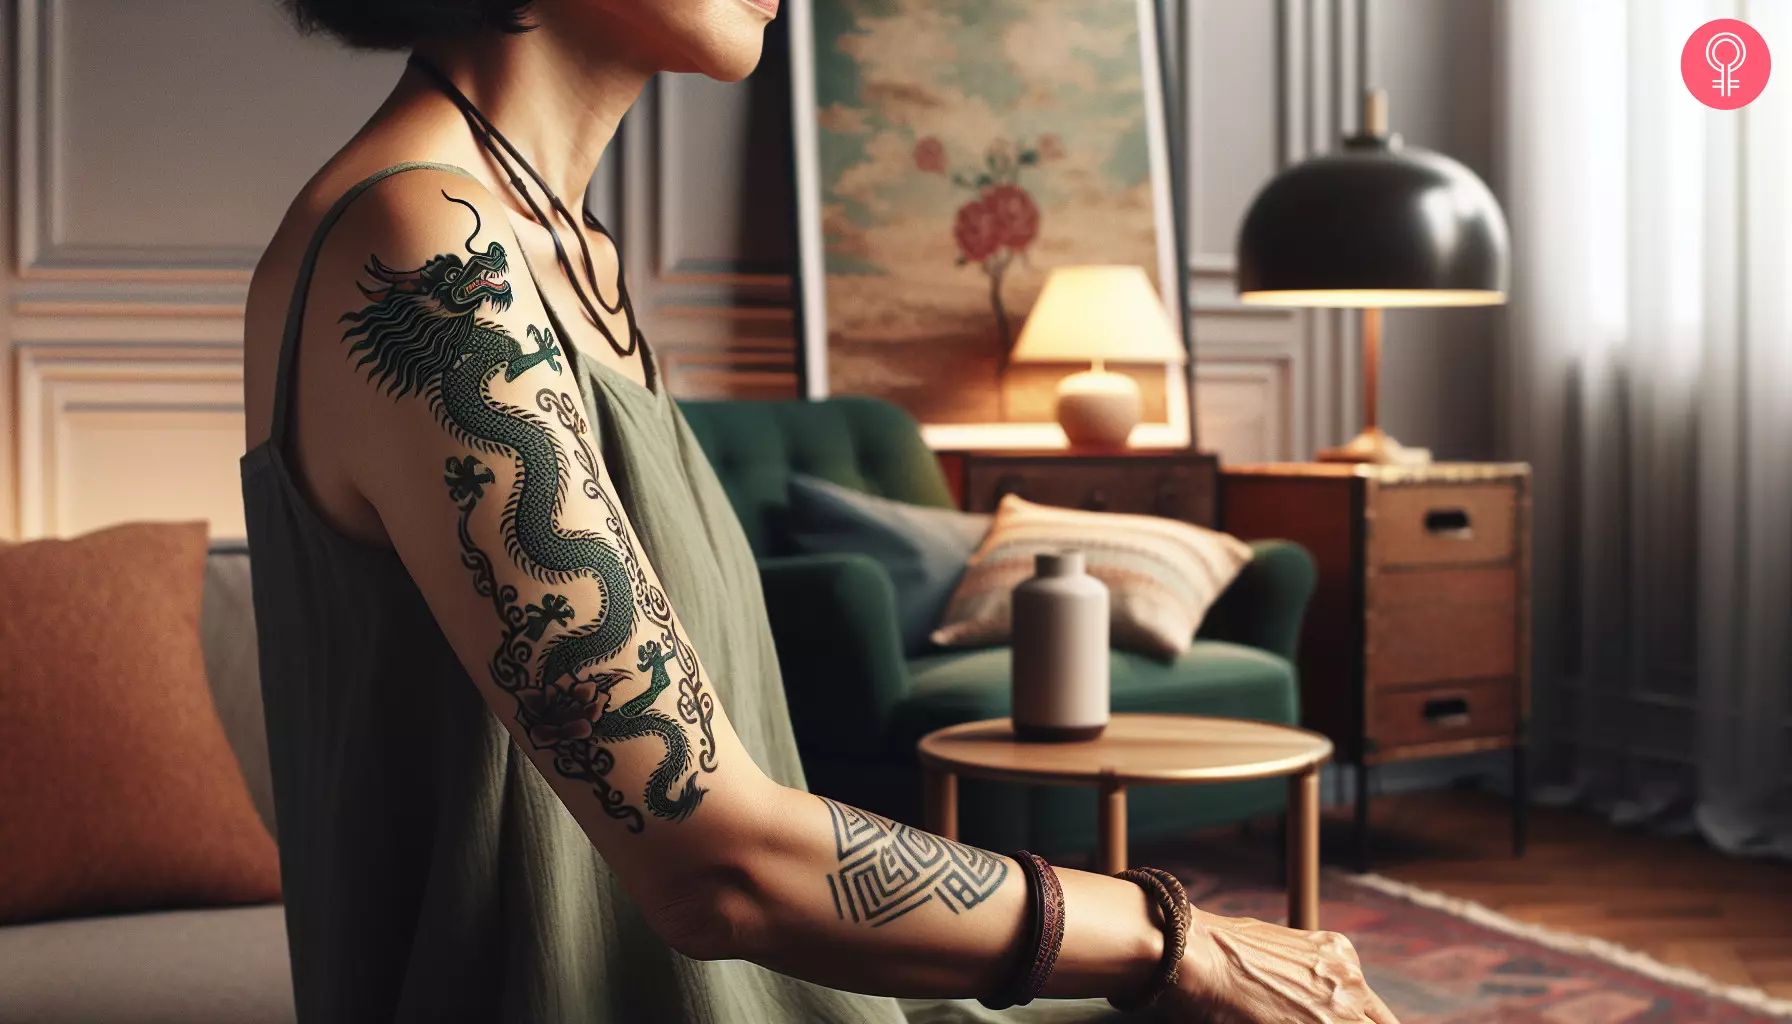 A green dragon tattoo on the arm of a woman